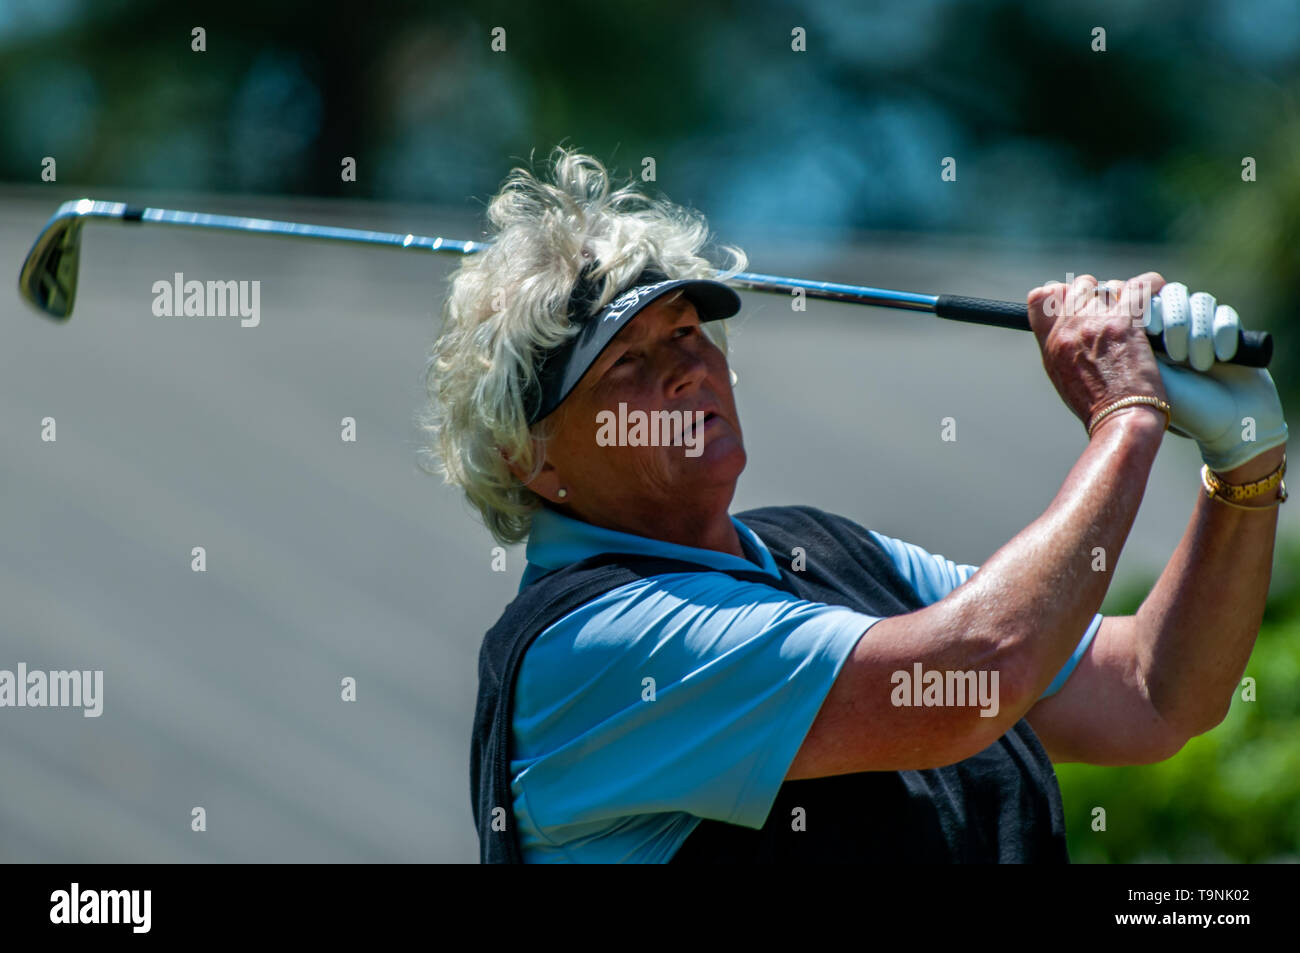 Southern Pines, North Carolina, USA. 19th May, 2019. May 19, 2019 - Southern Pines, North Carolina, US - LAURA DAVIES of England plays her shot from the ninth tee during the final round of the USGA's 2nd U.S. Senior Women's Open Championship at Pine Needles Lodge & Golf Club, May 19, 2019 in Southern Pines, North Carolina. HELEN ALFREDSSON of Sweden won with a final round of 72, carding a 285 total for the tournament. Credit: Timothy L. Hale/ZUMA Wire/Alamy Live News Stock Photo